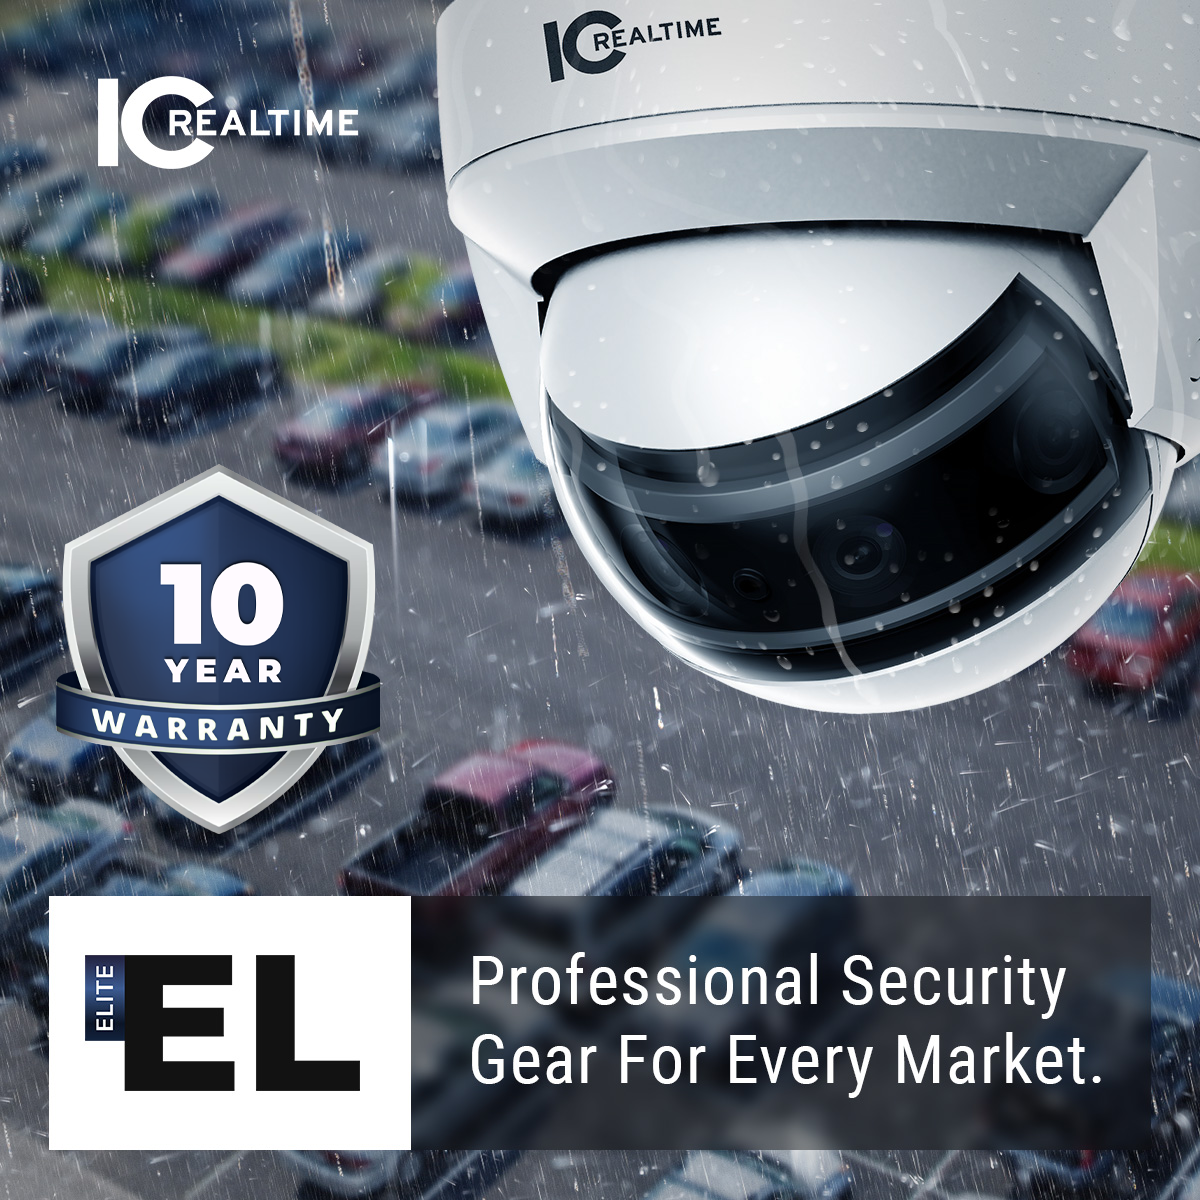 IC Realtime ELITE Professional Security Gear...10 Year Warranty